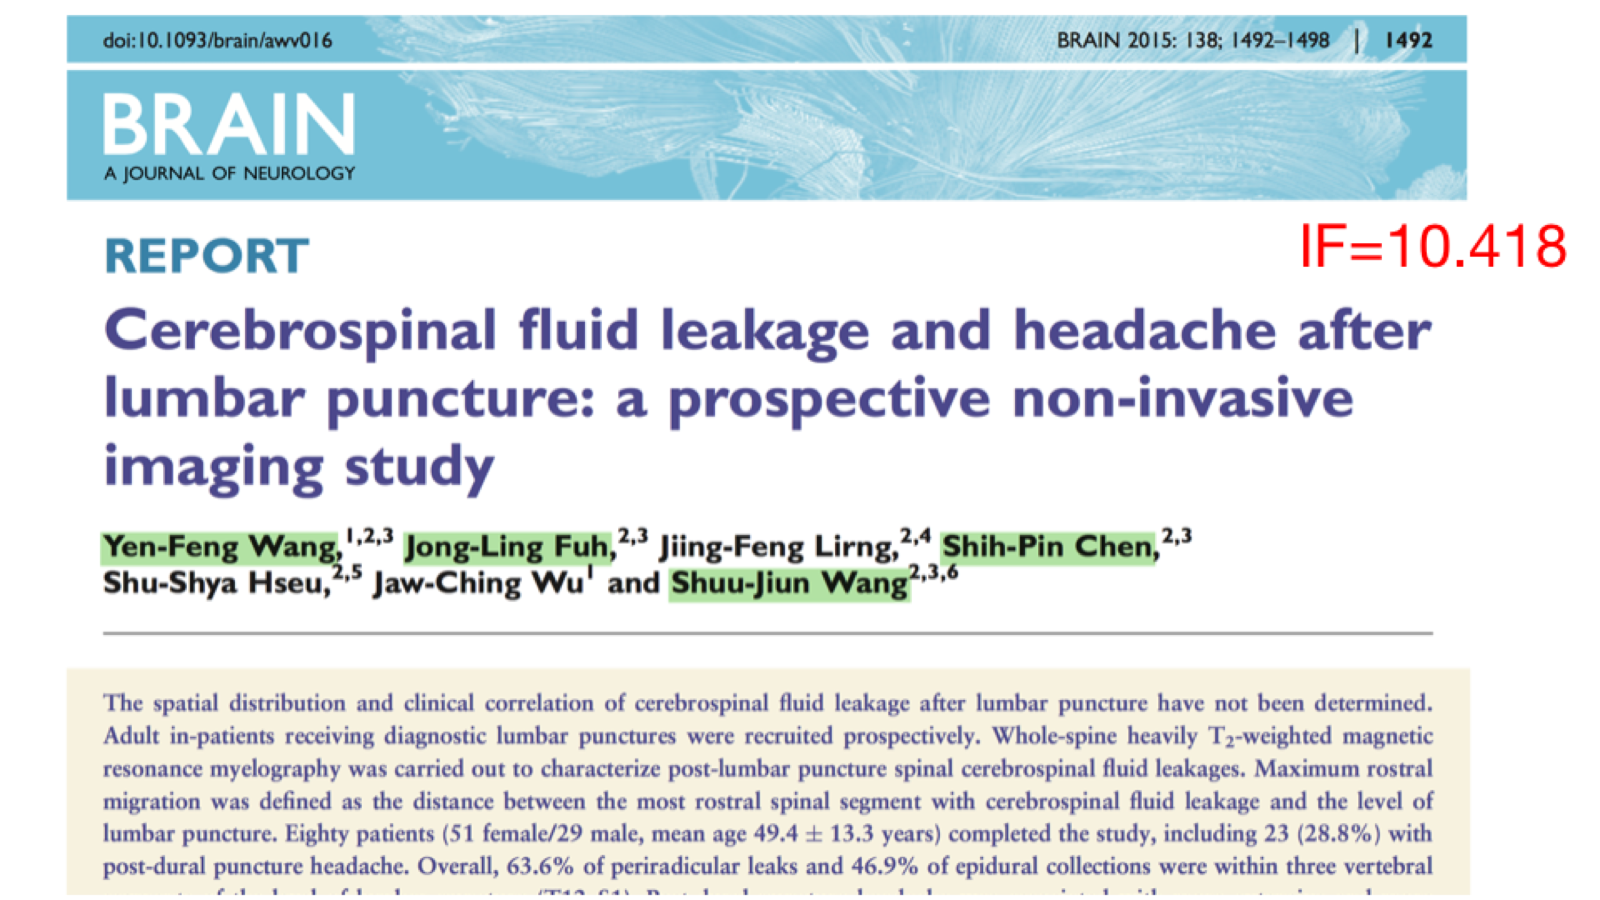 CSF leakage and headache after lumbar puncture: a prospective non-invasive imaging study. IF=10.418